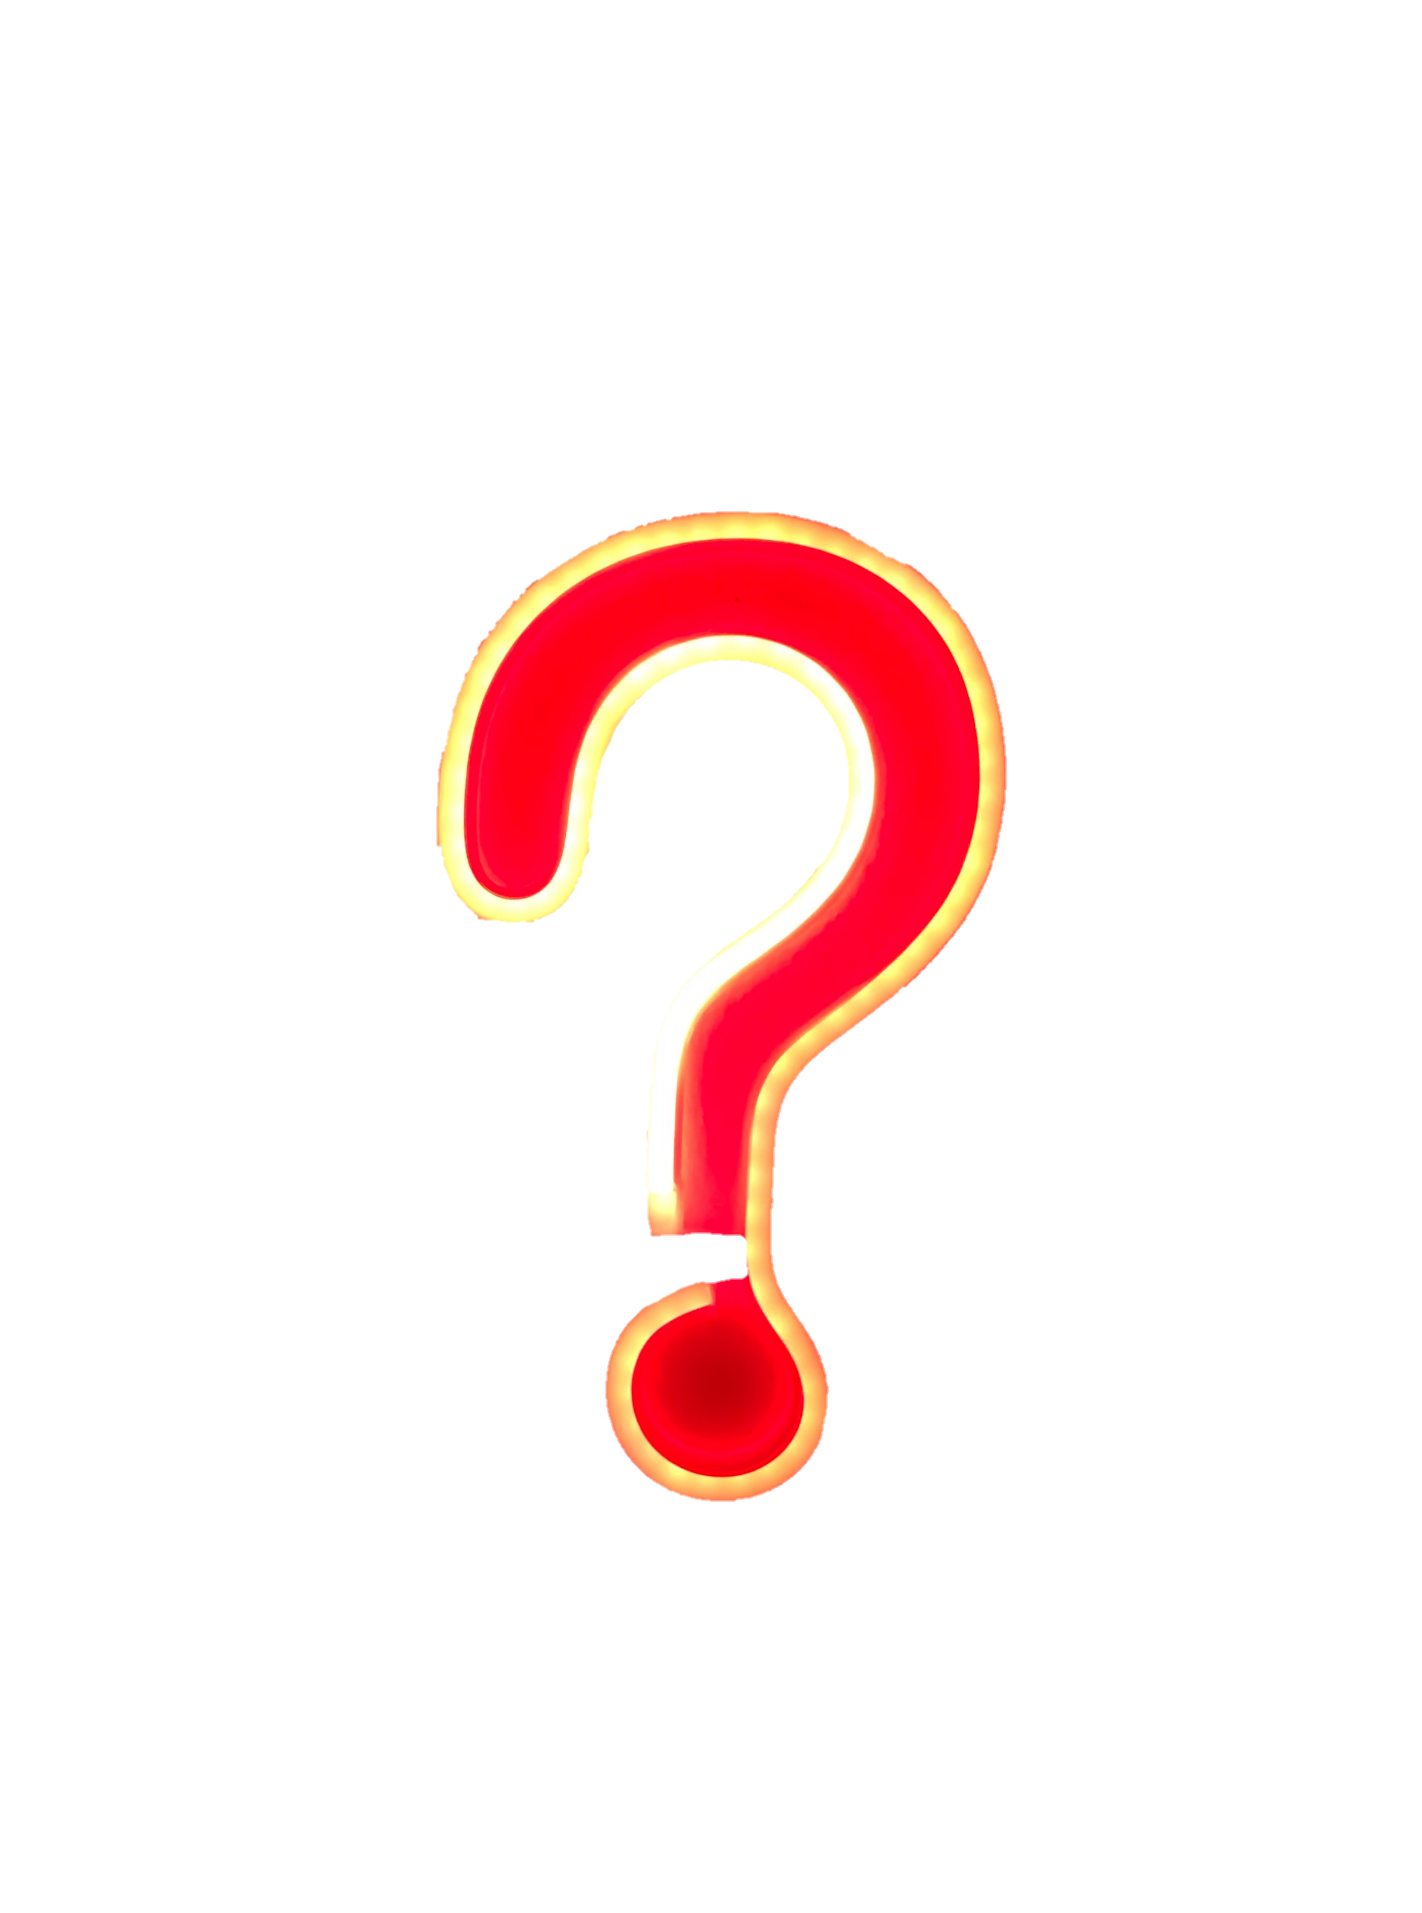 question-mark-png-from-pngfre-29